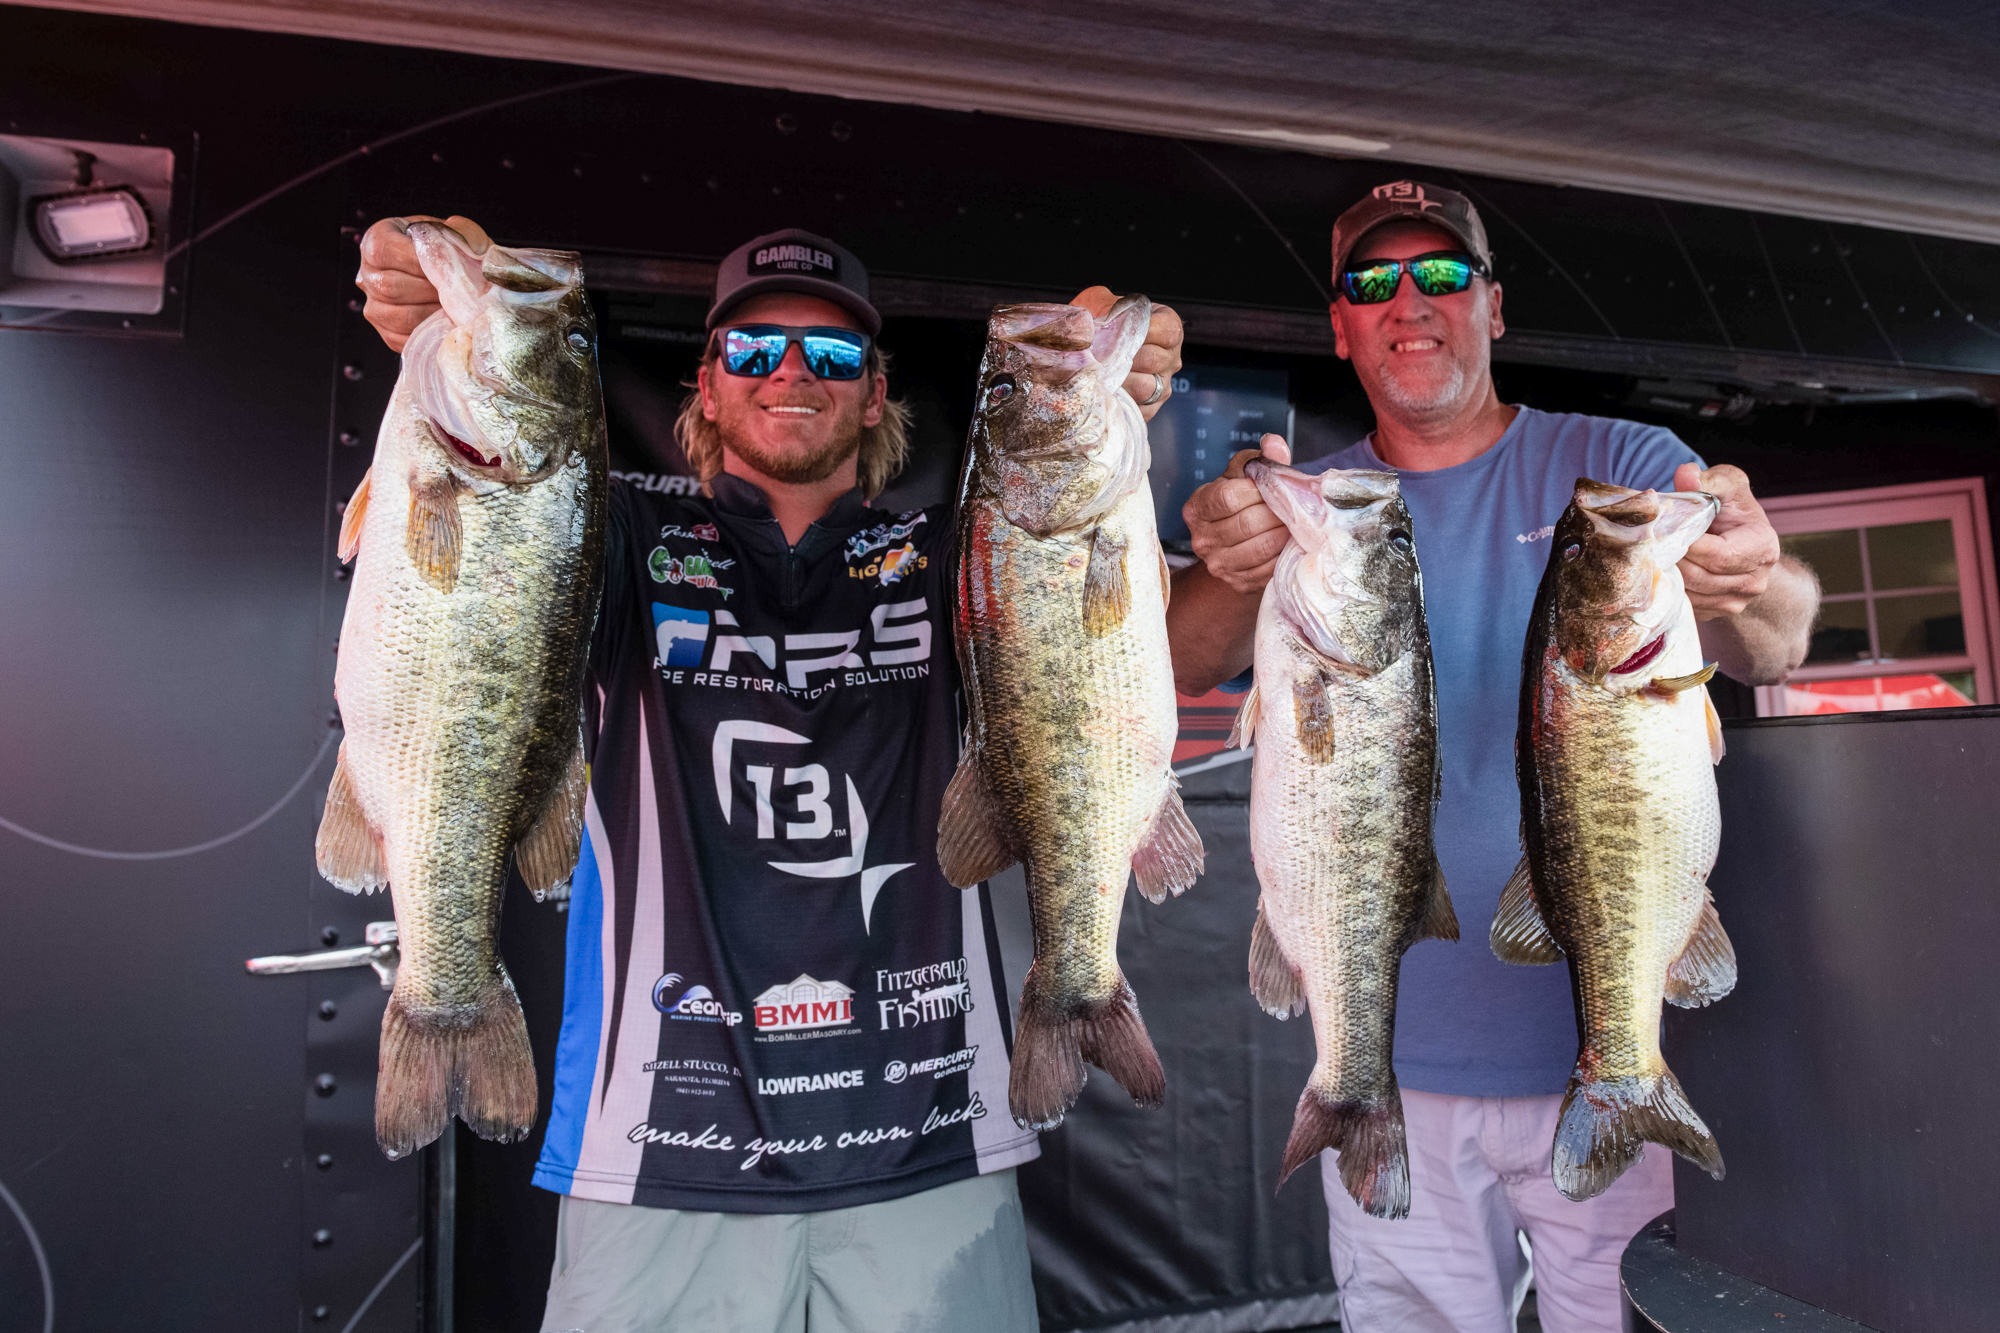 GALLERY: Final-day weigh-in at Lake Okeechobee - Major League Fishing